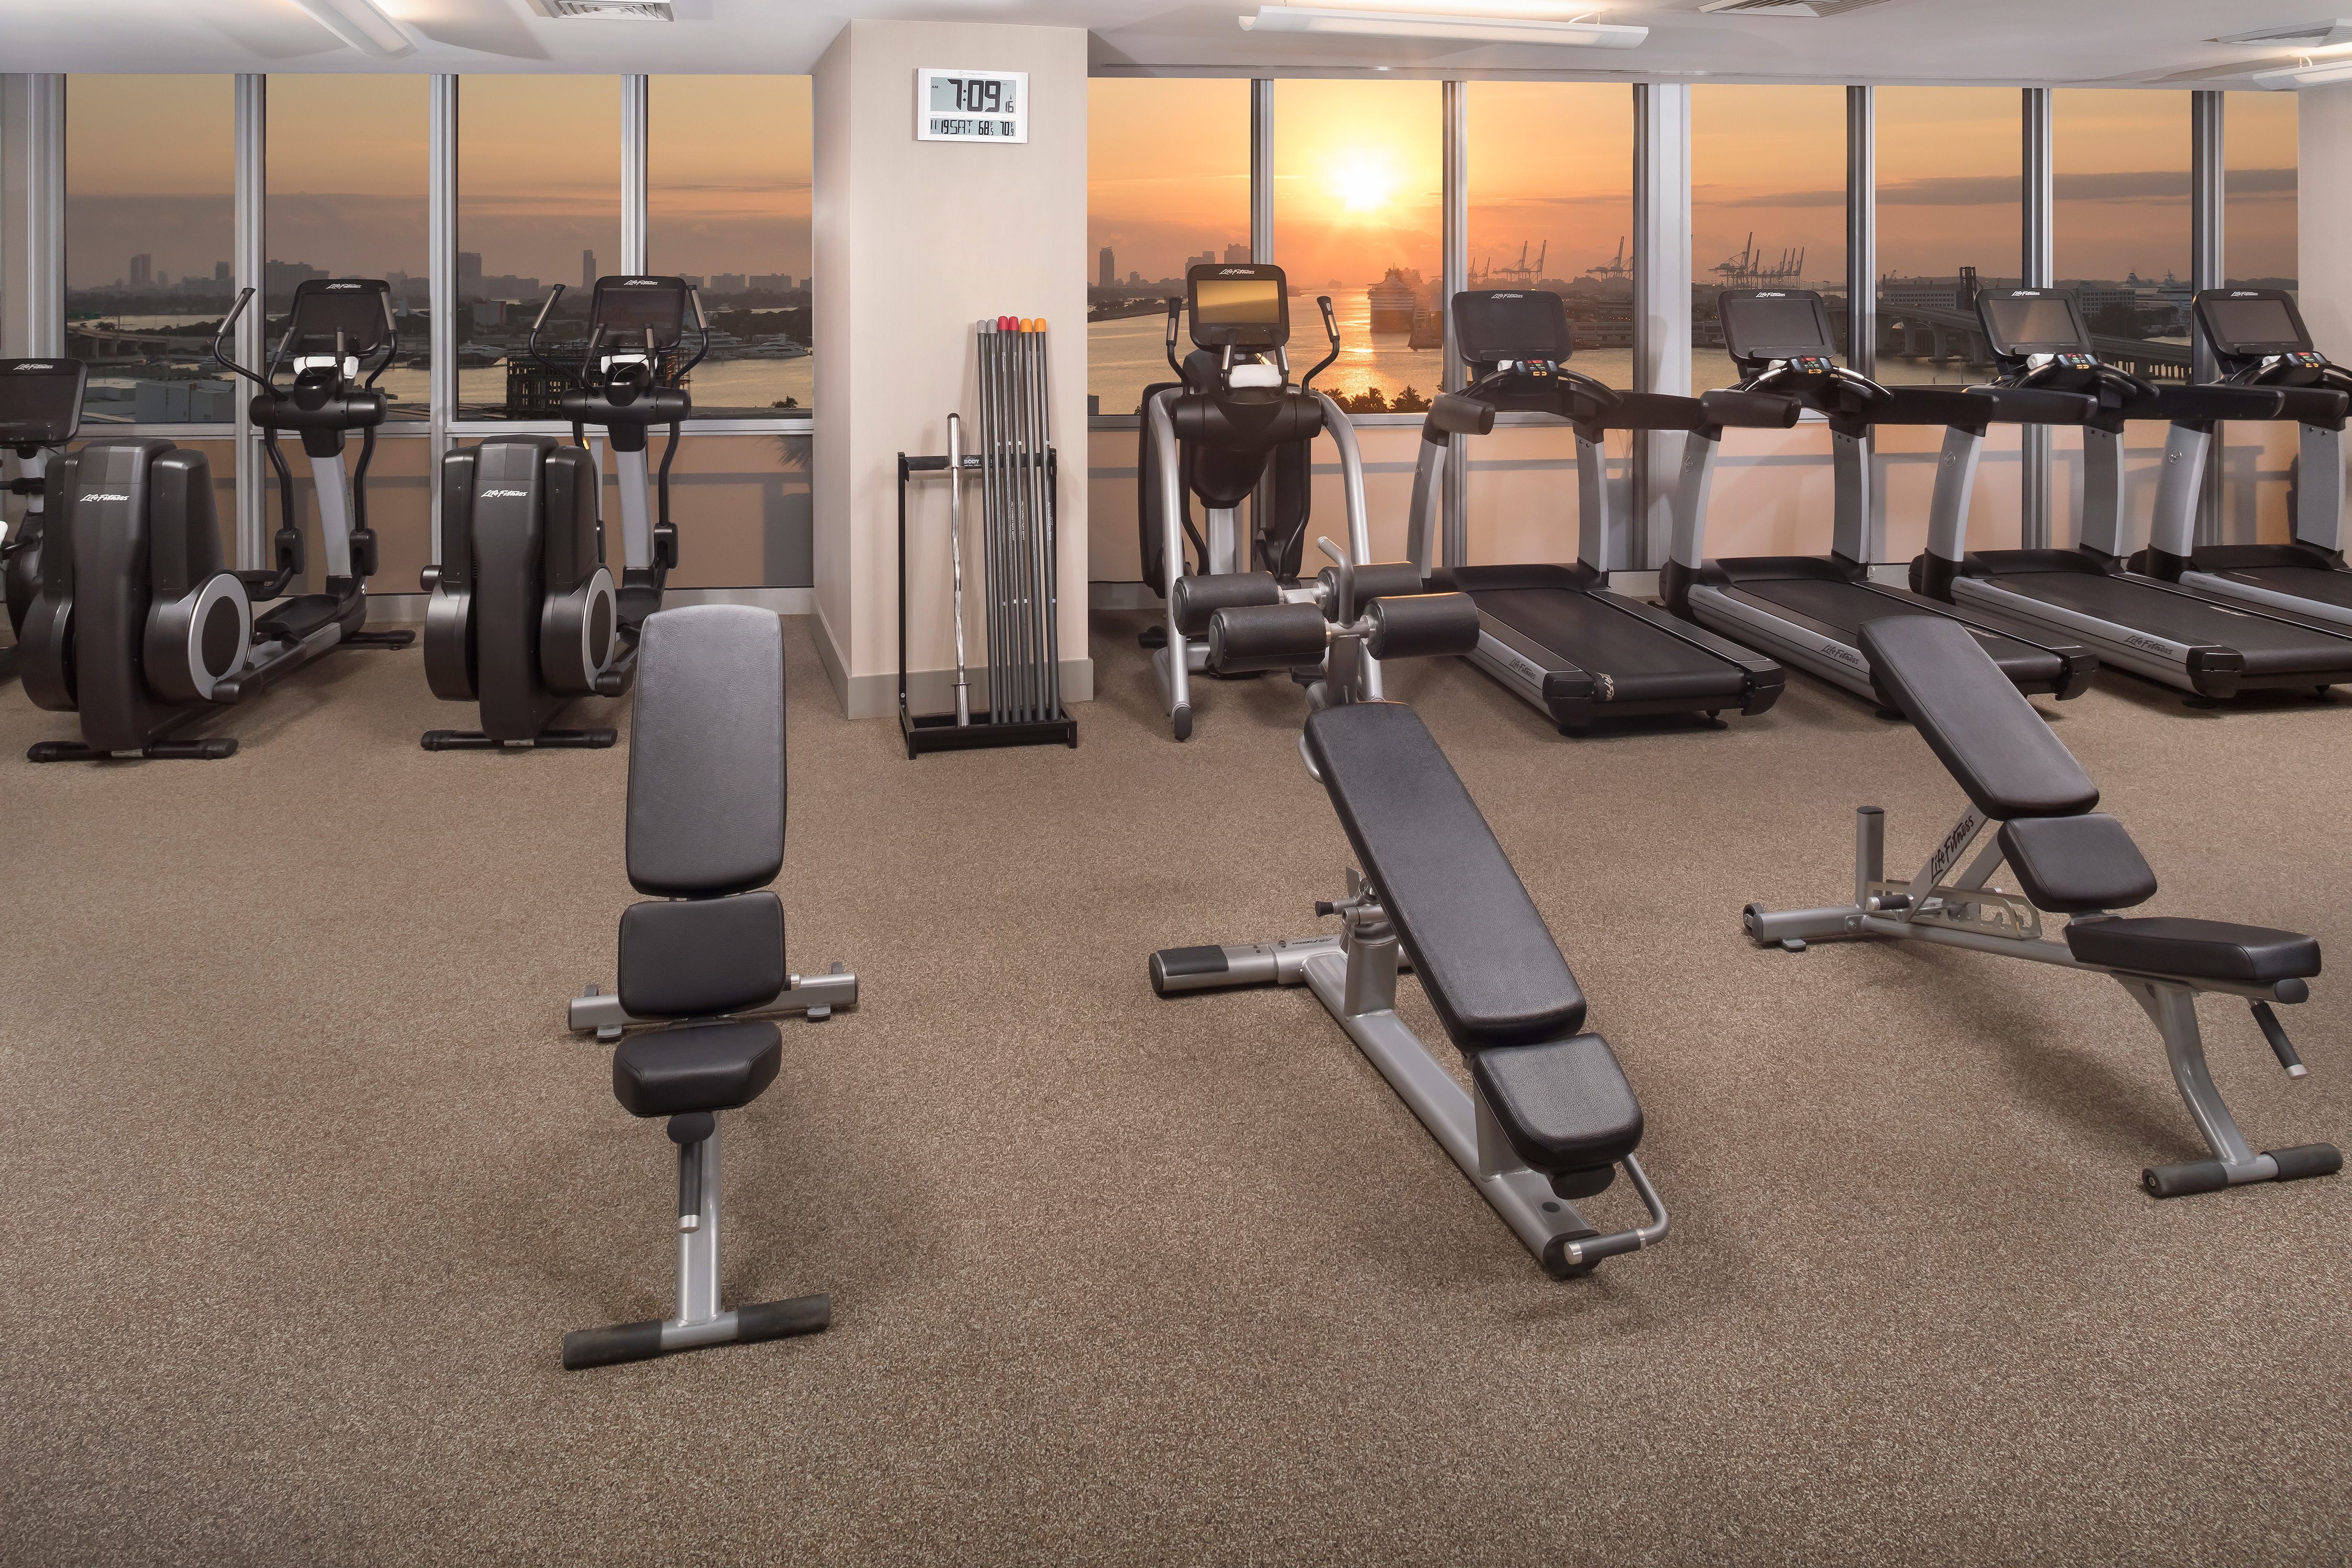 Fitness Center with Treadmills, Elliptical Machines, and Outside View